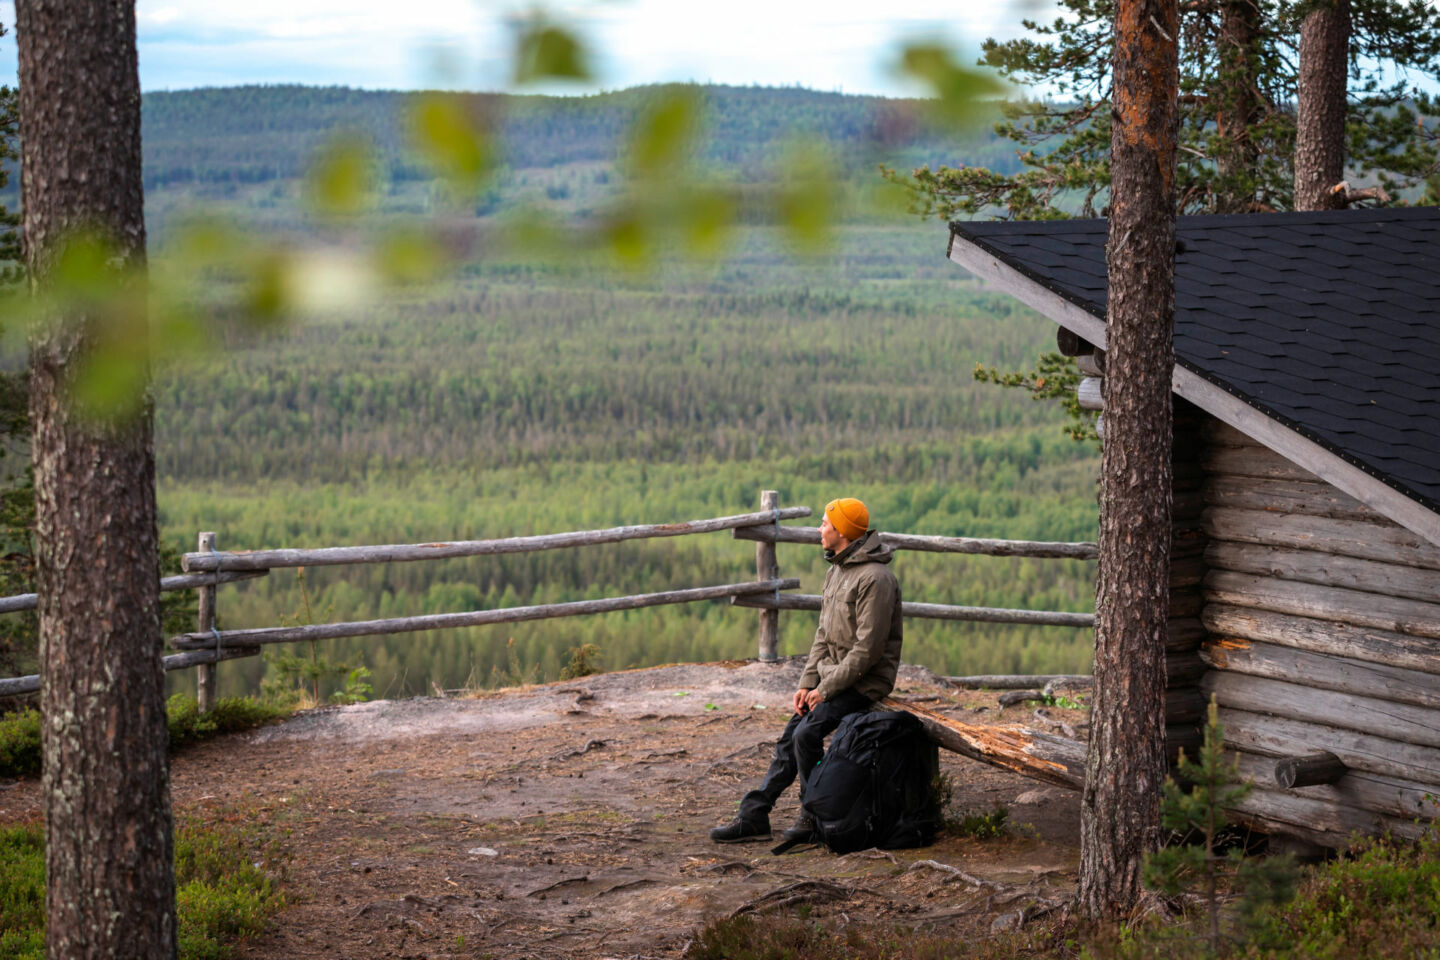 Enjoying the view from atop a hill in Pello, Finland